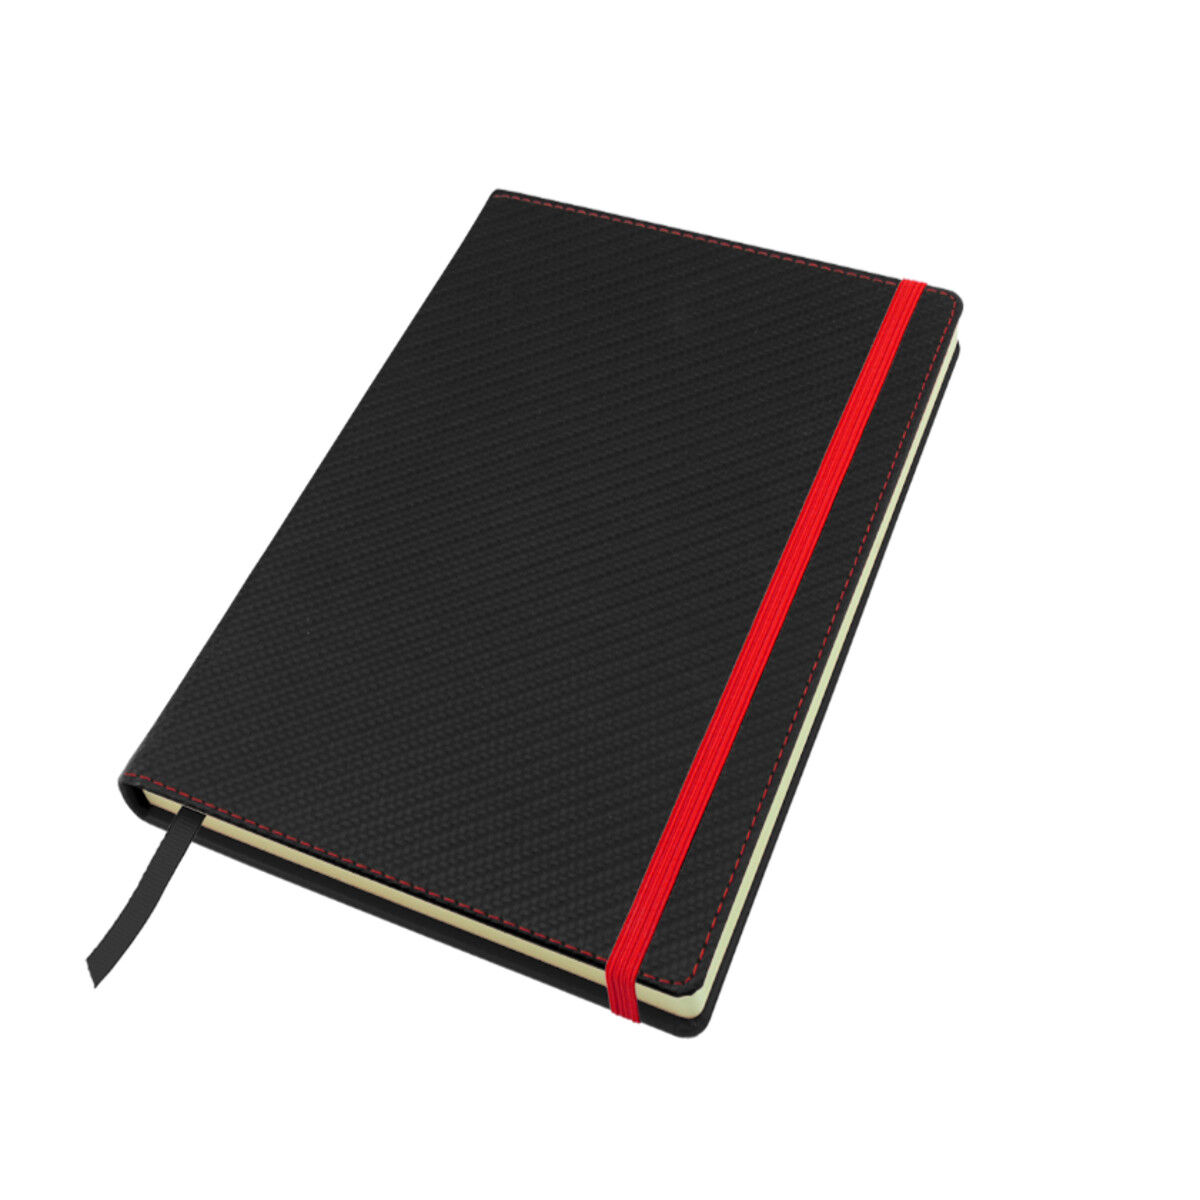 Casebound notebook with optional page marker, strap and outer edge stitching